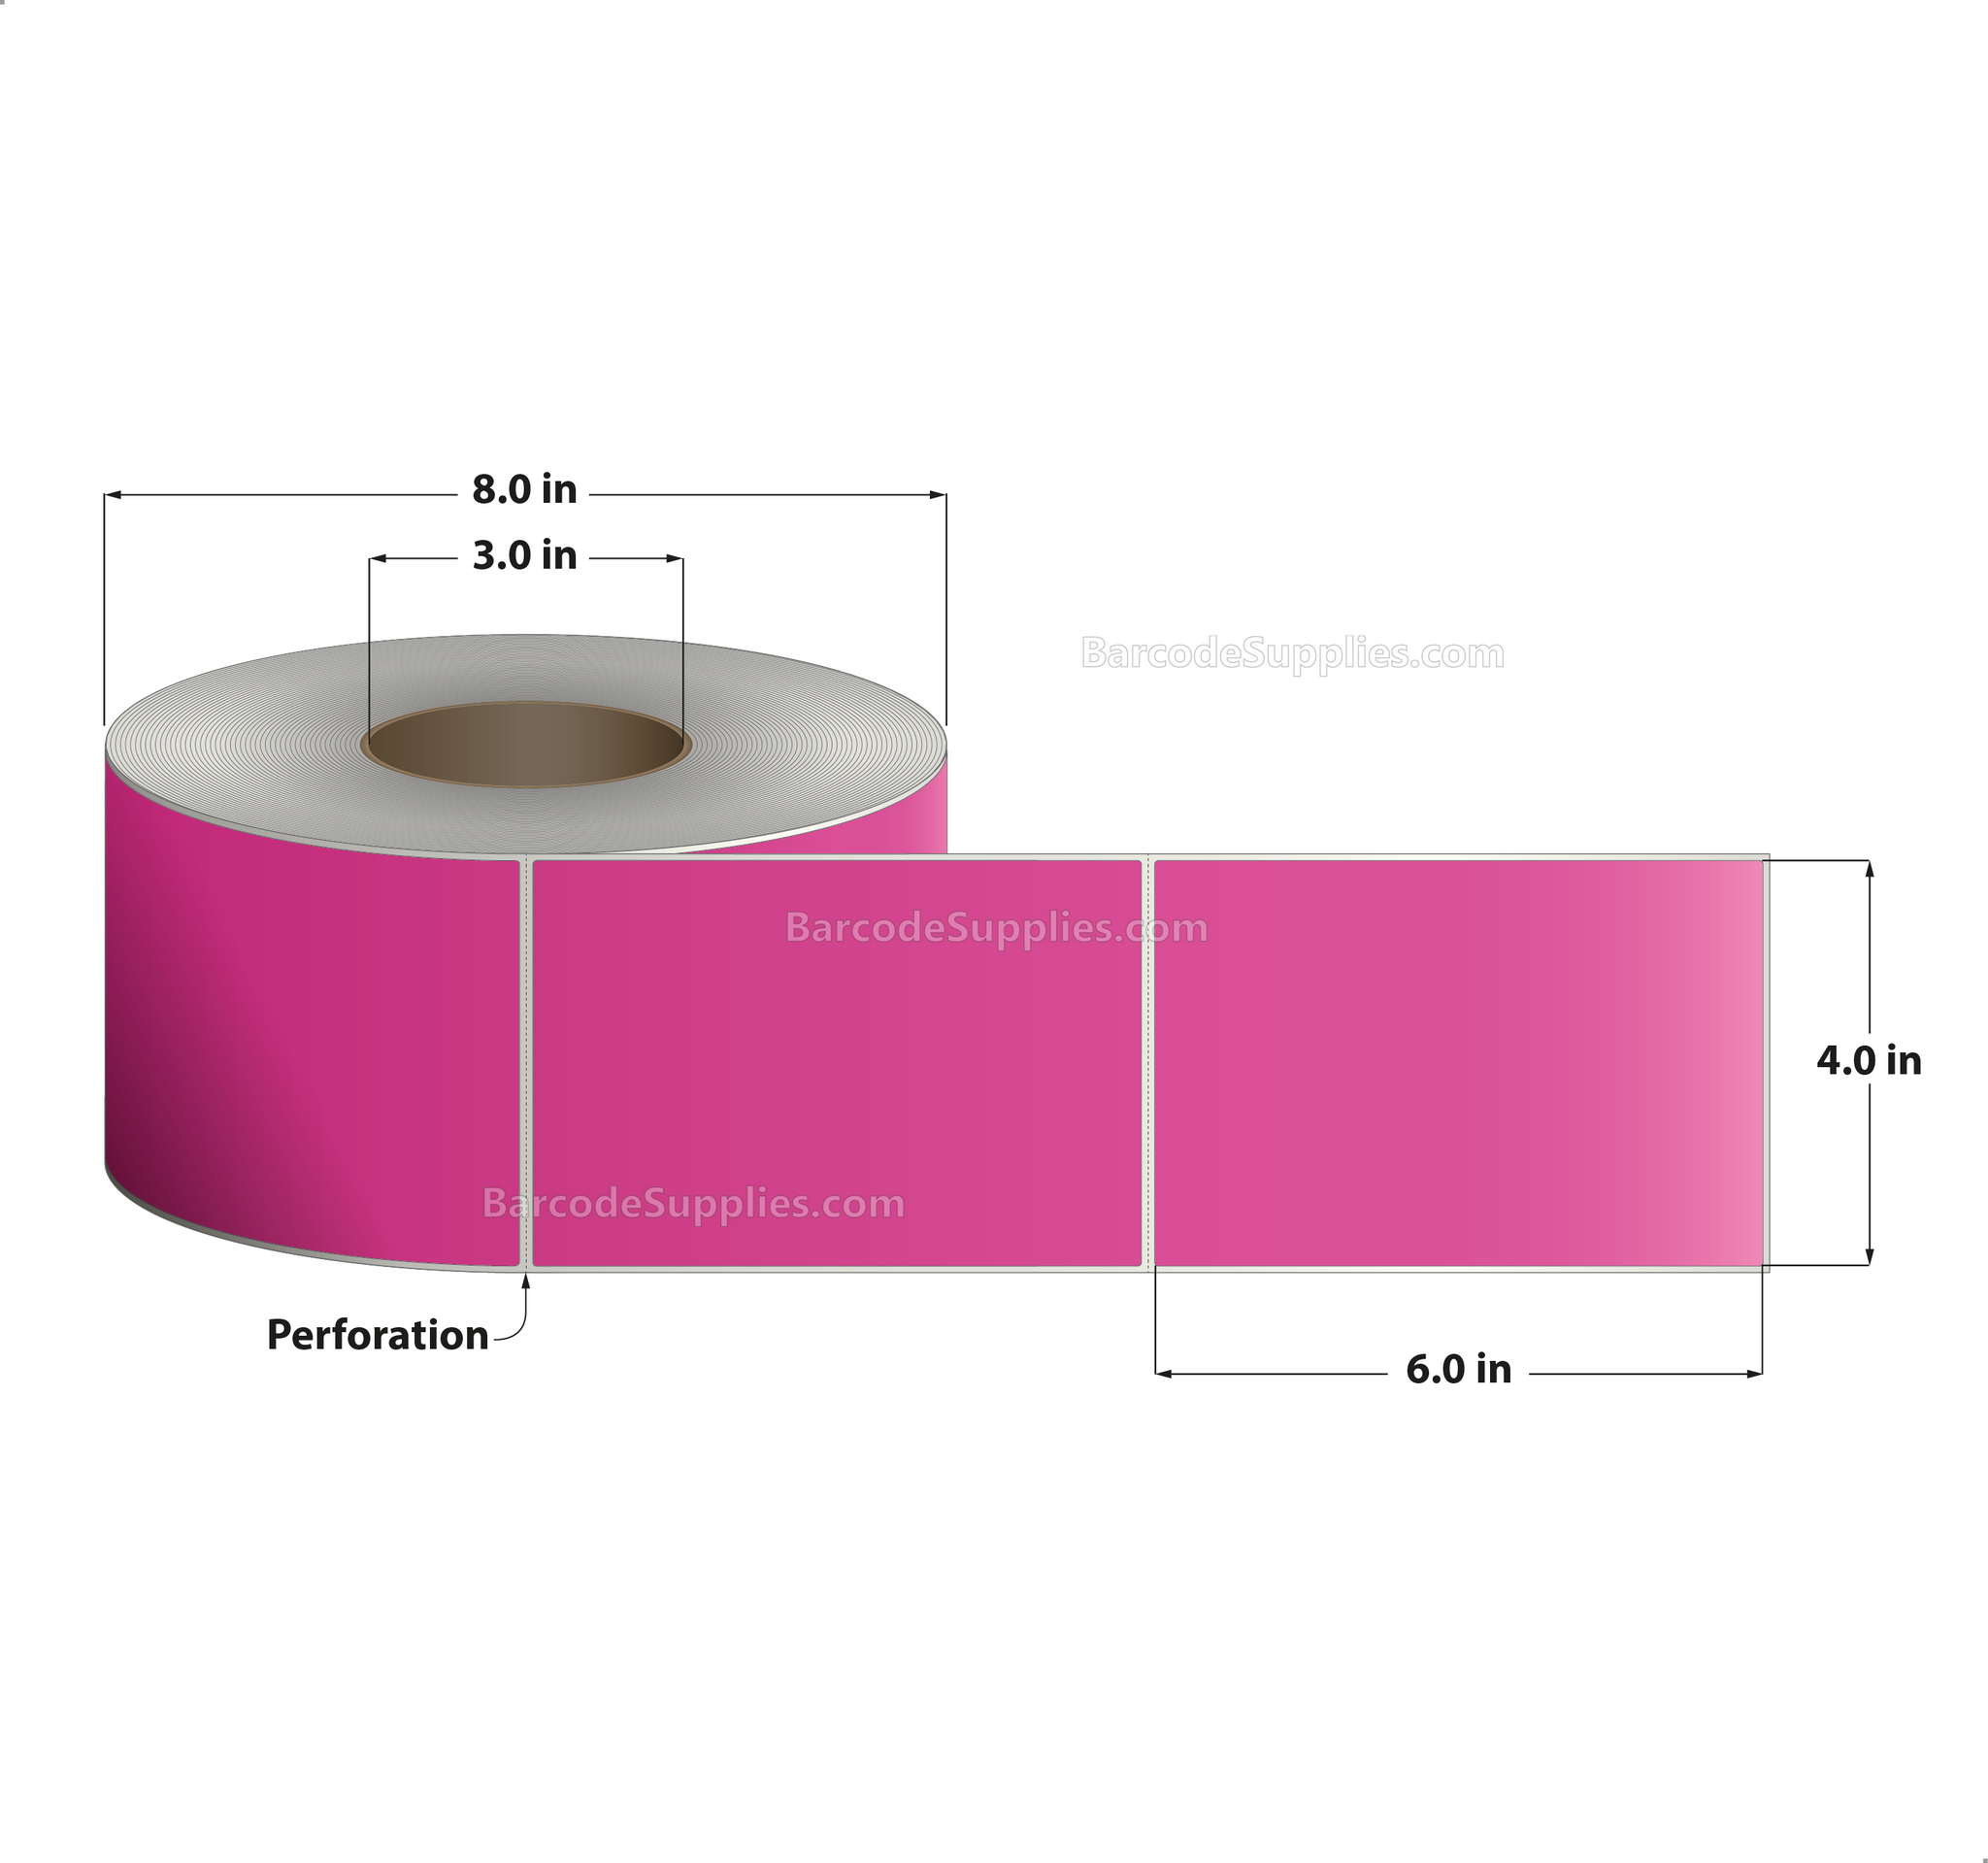 4 x 6 Thermal Transfer Fluorescent Pink Labels With Permanent Acrylic Adhesive - Perforated - 1000 Labels Per Roll - Carton Of 4 Rolls - 4000 Labels Total - MPN: TH46-1PFP